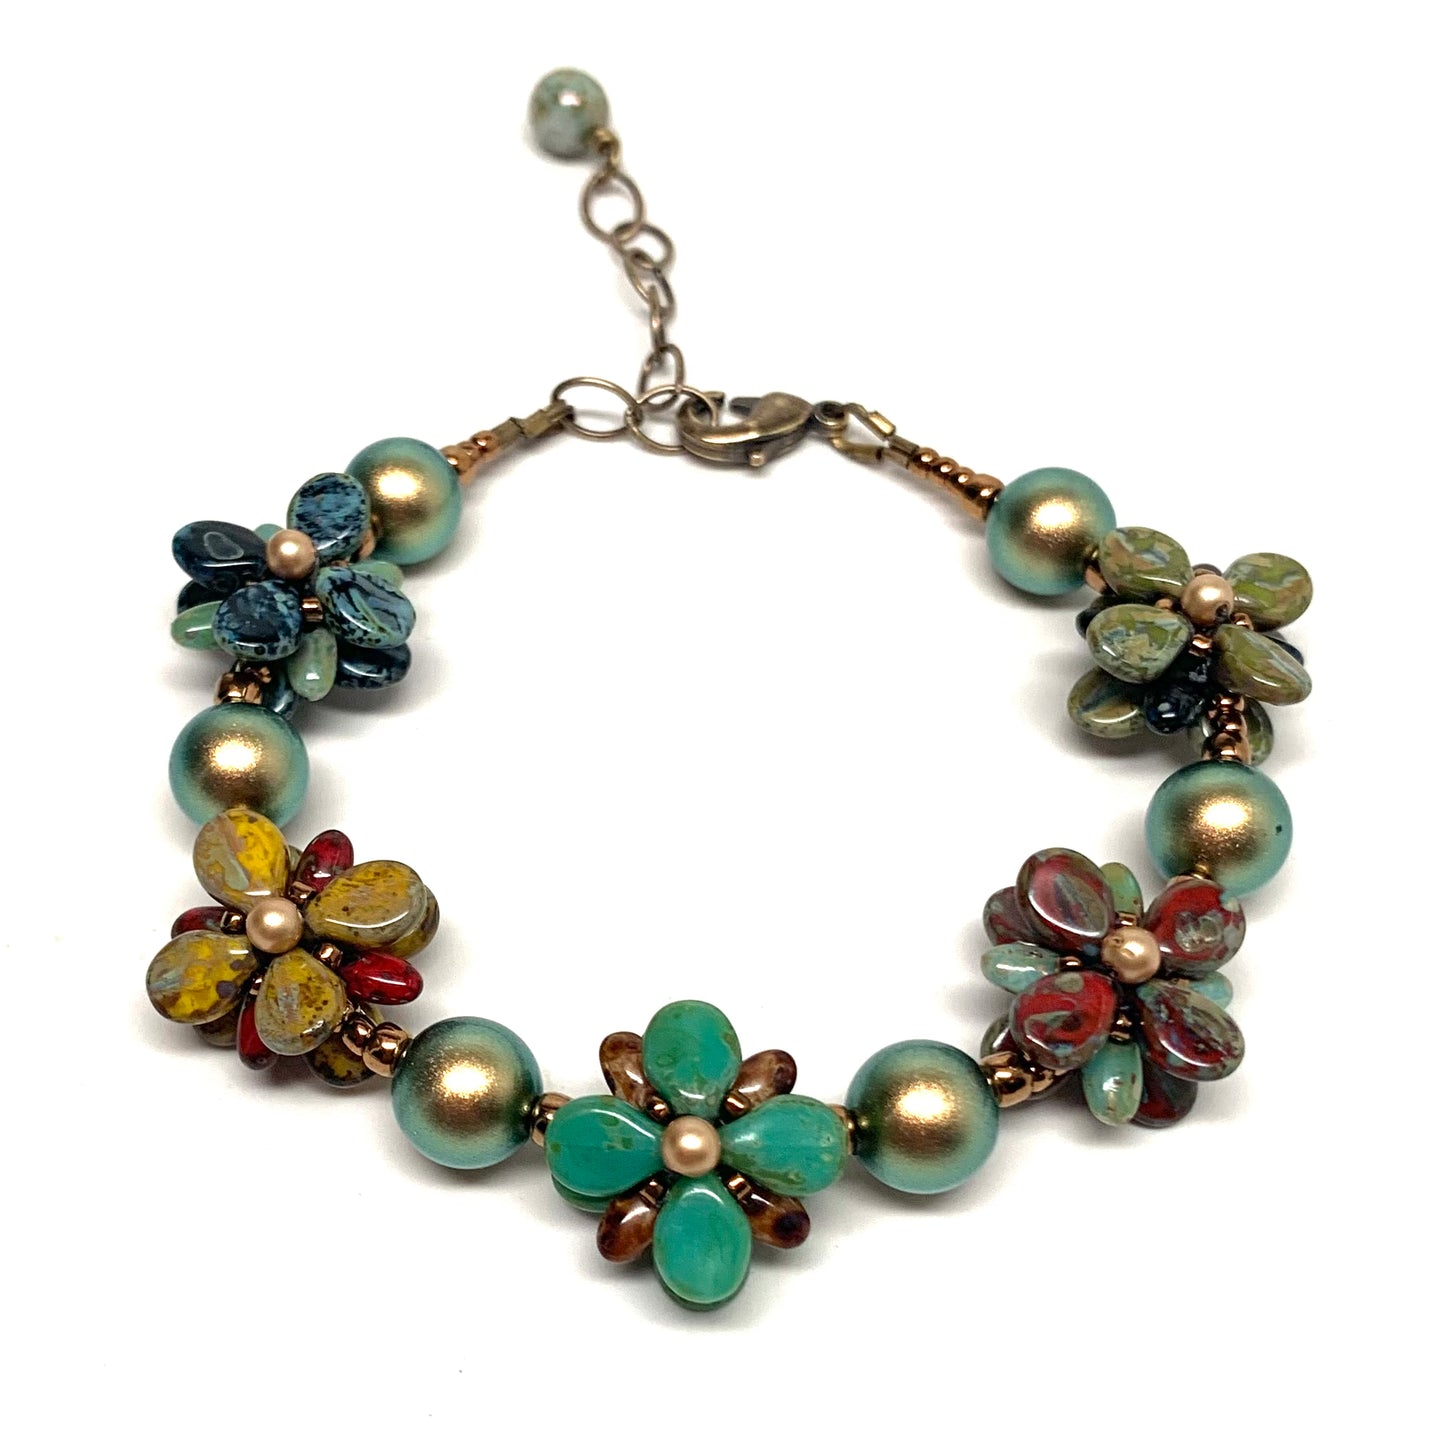 Flores Bracelet - Picasso Mix Flowers with Green Pearls